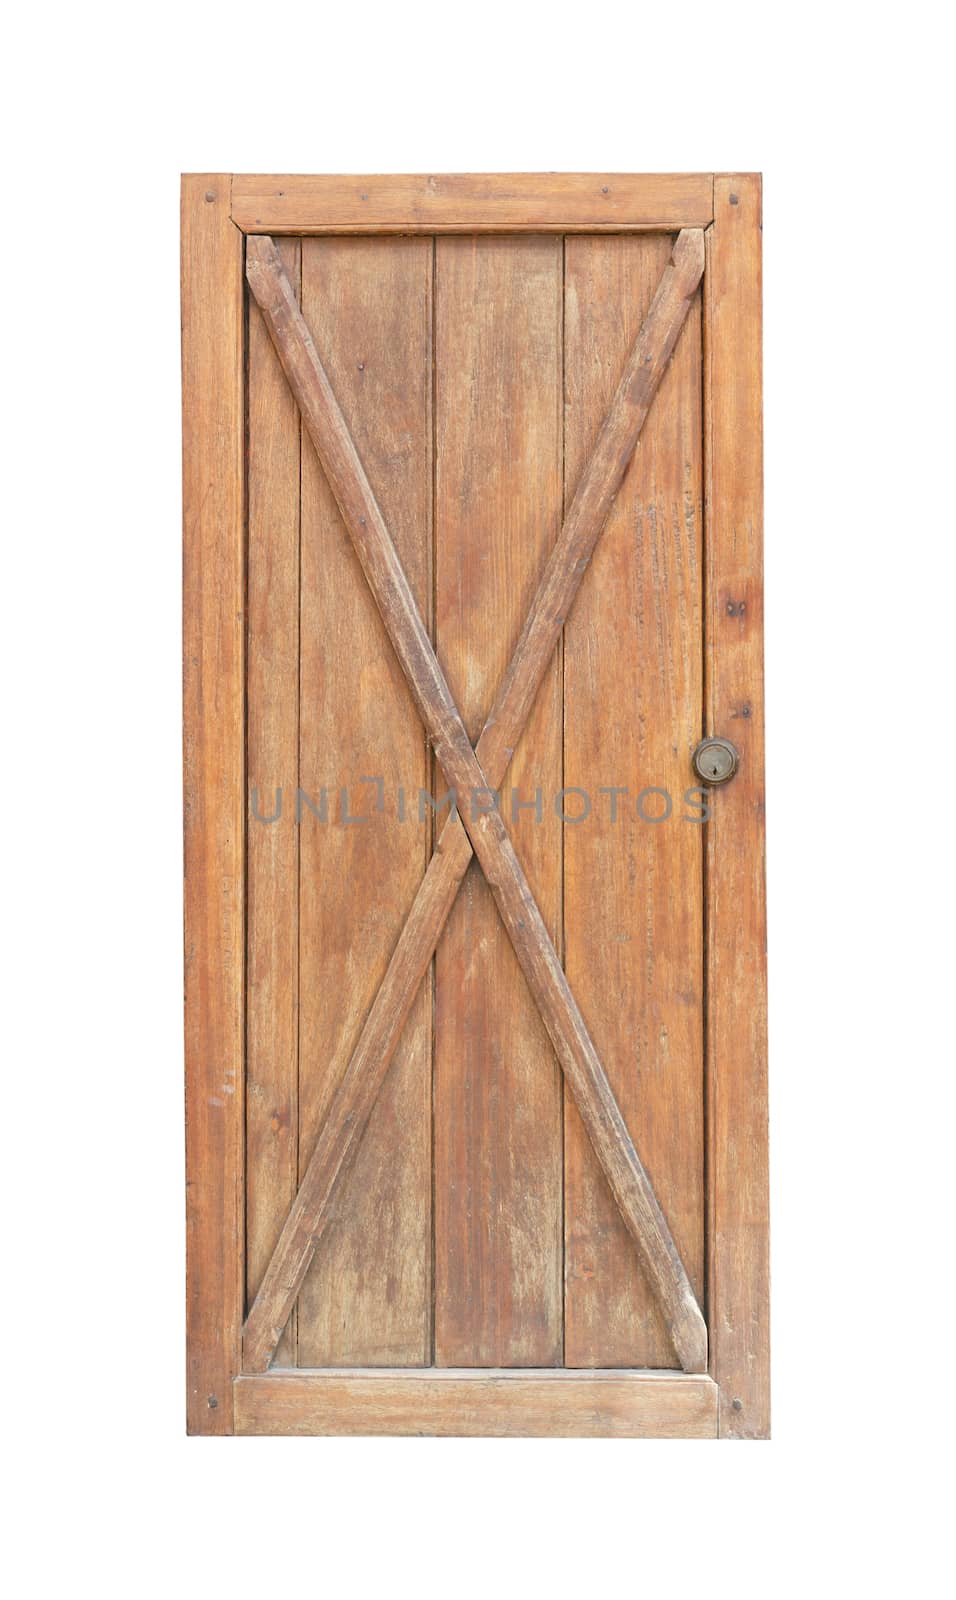 Old wooden door isotlated on white background